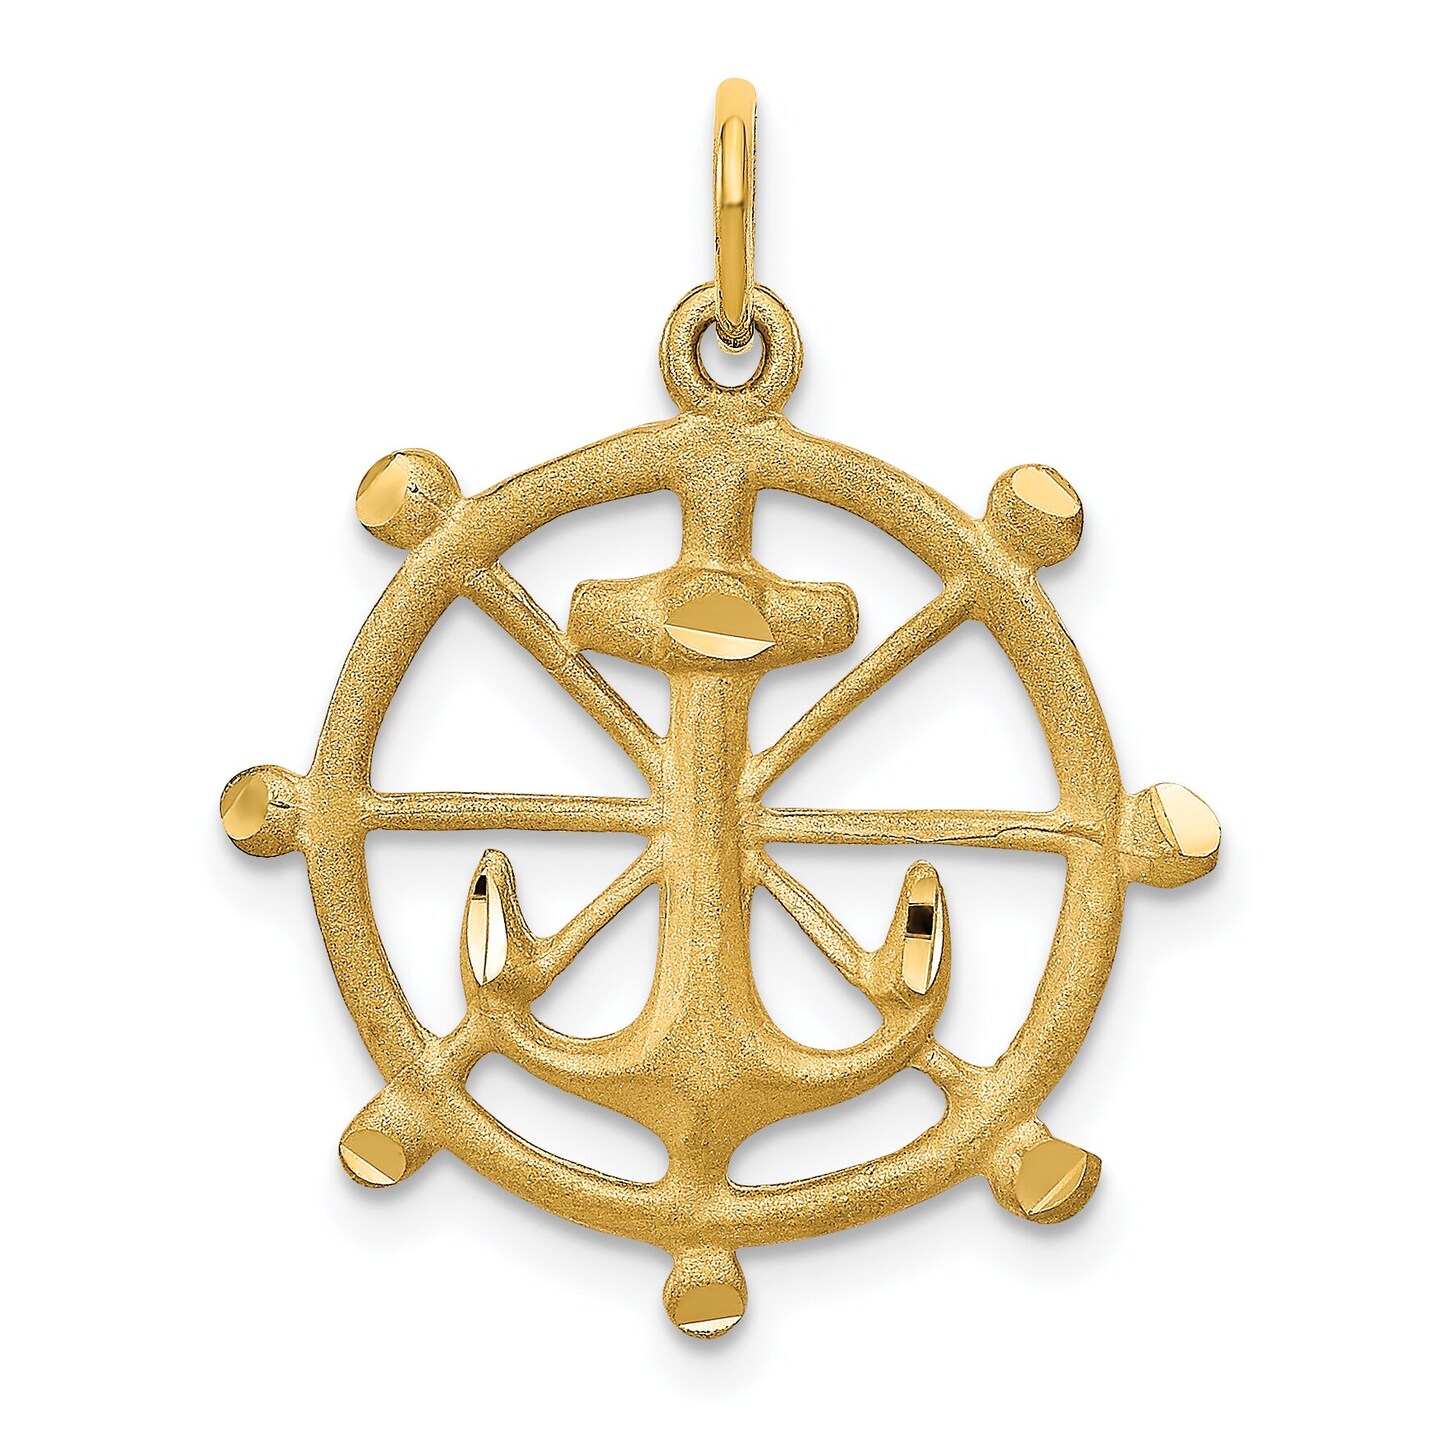 10K Yellow Gold Anchor in Ship Wheel Charm Jewelry 26mm x 21mm